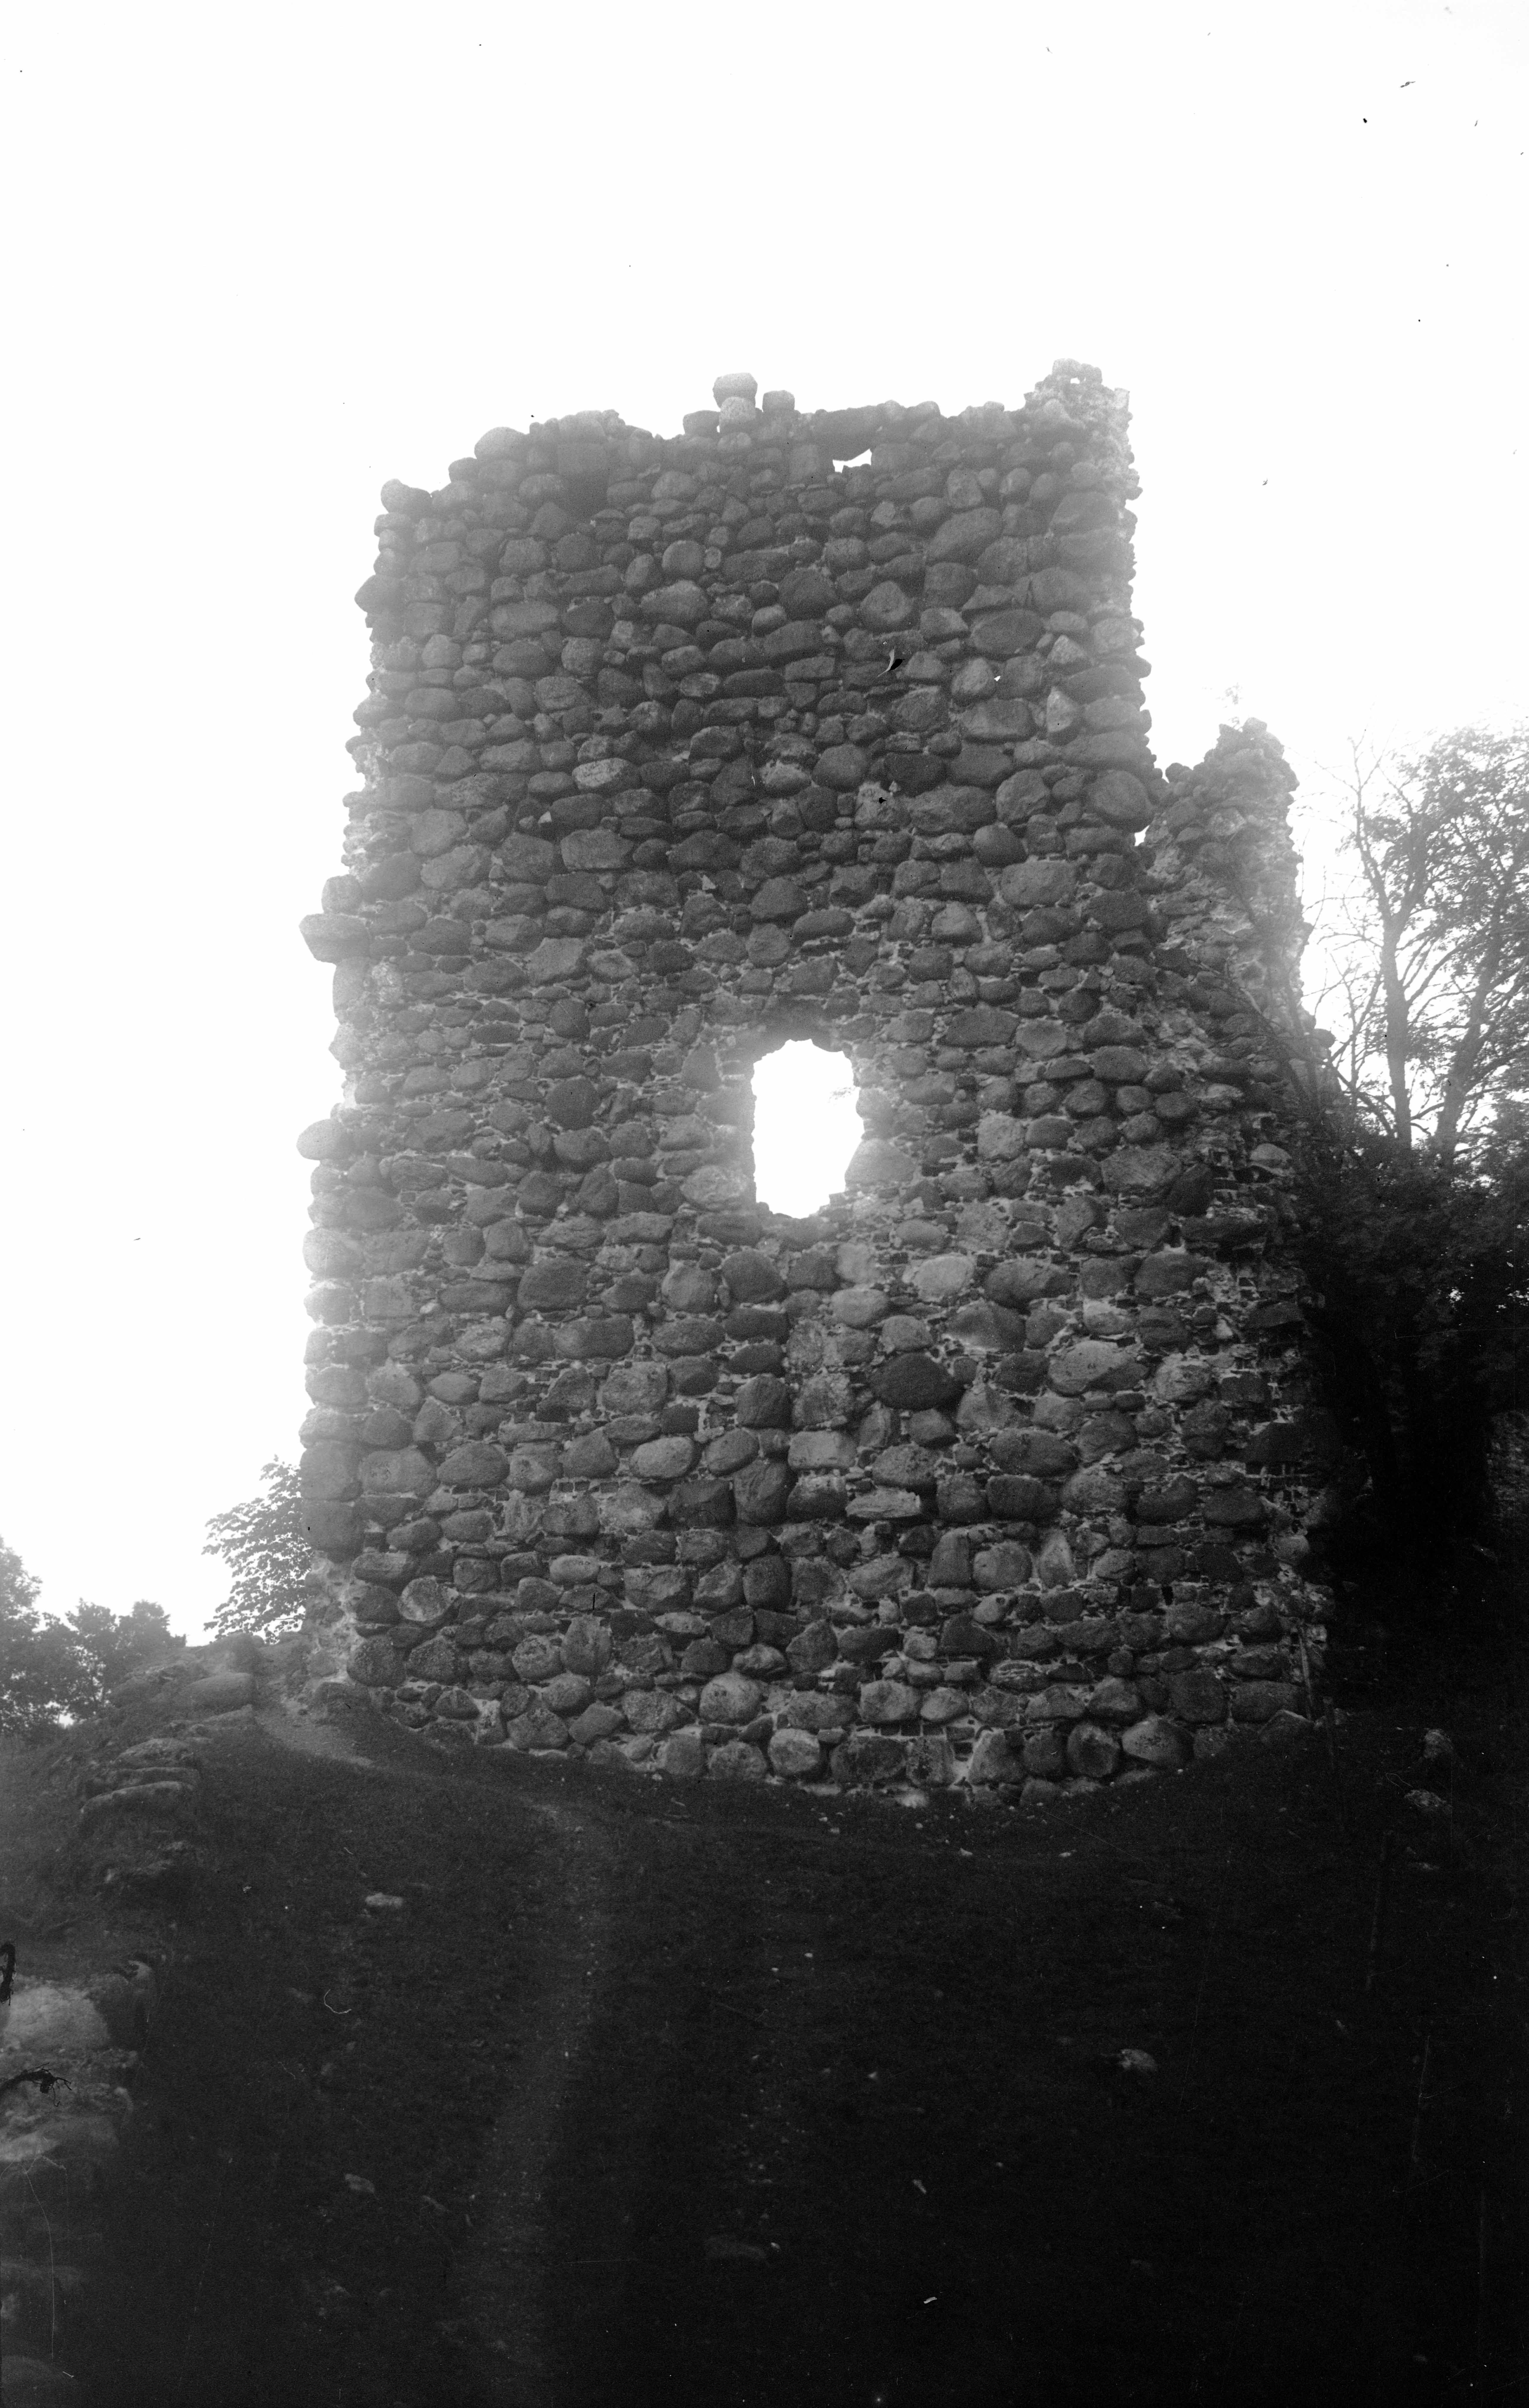 The ruins of the castle. Tower